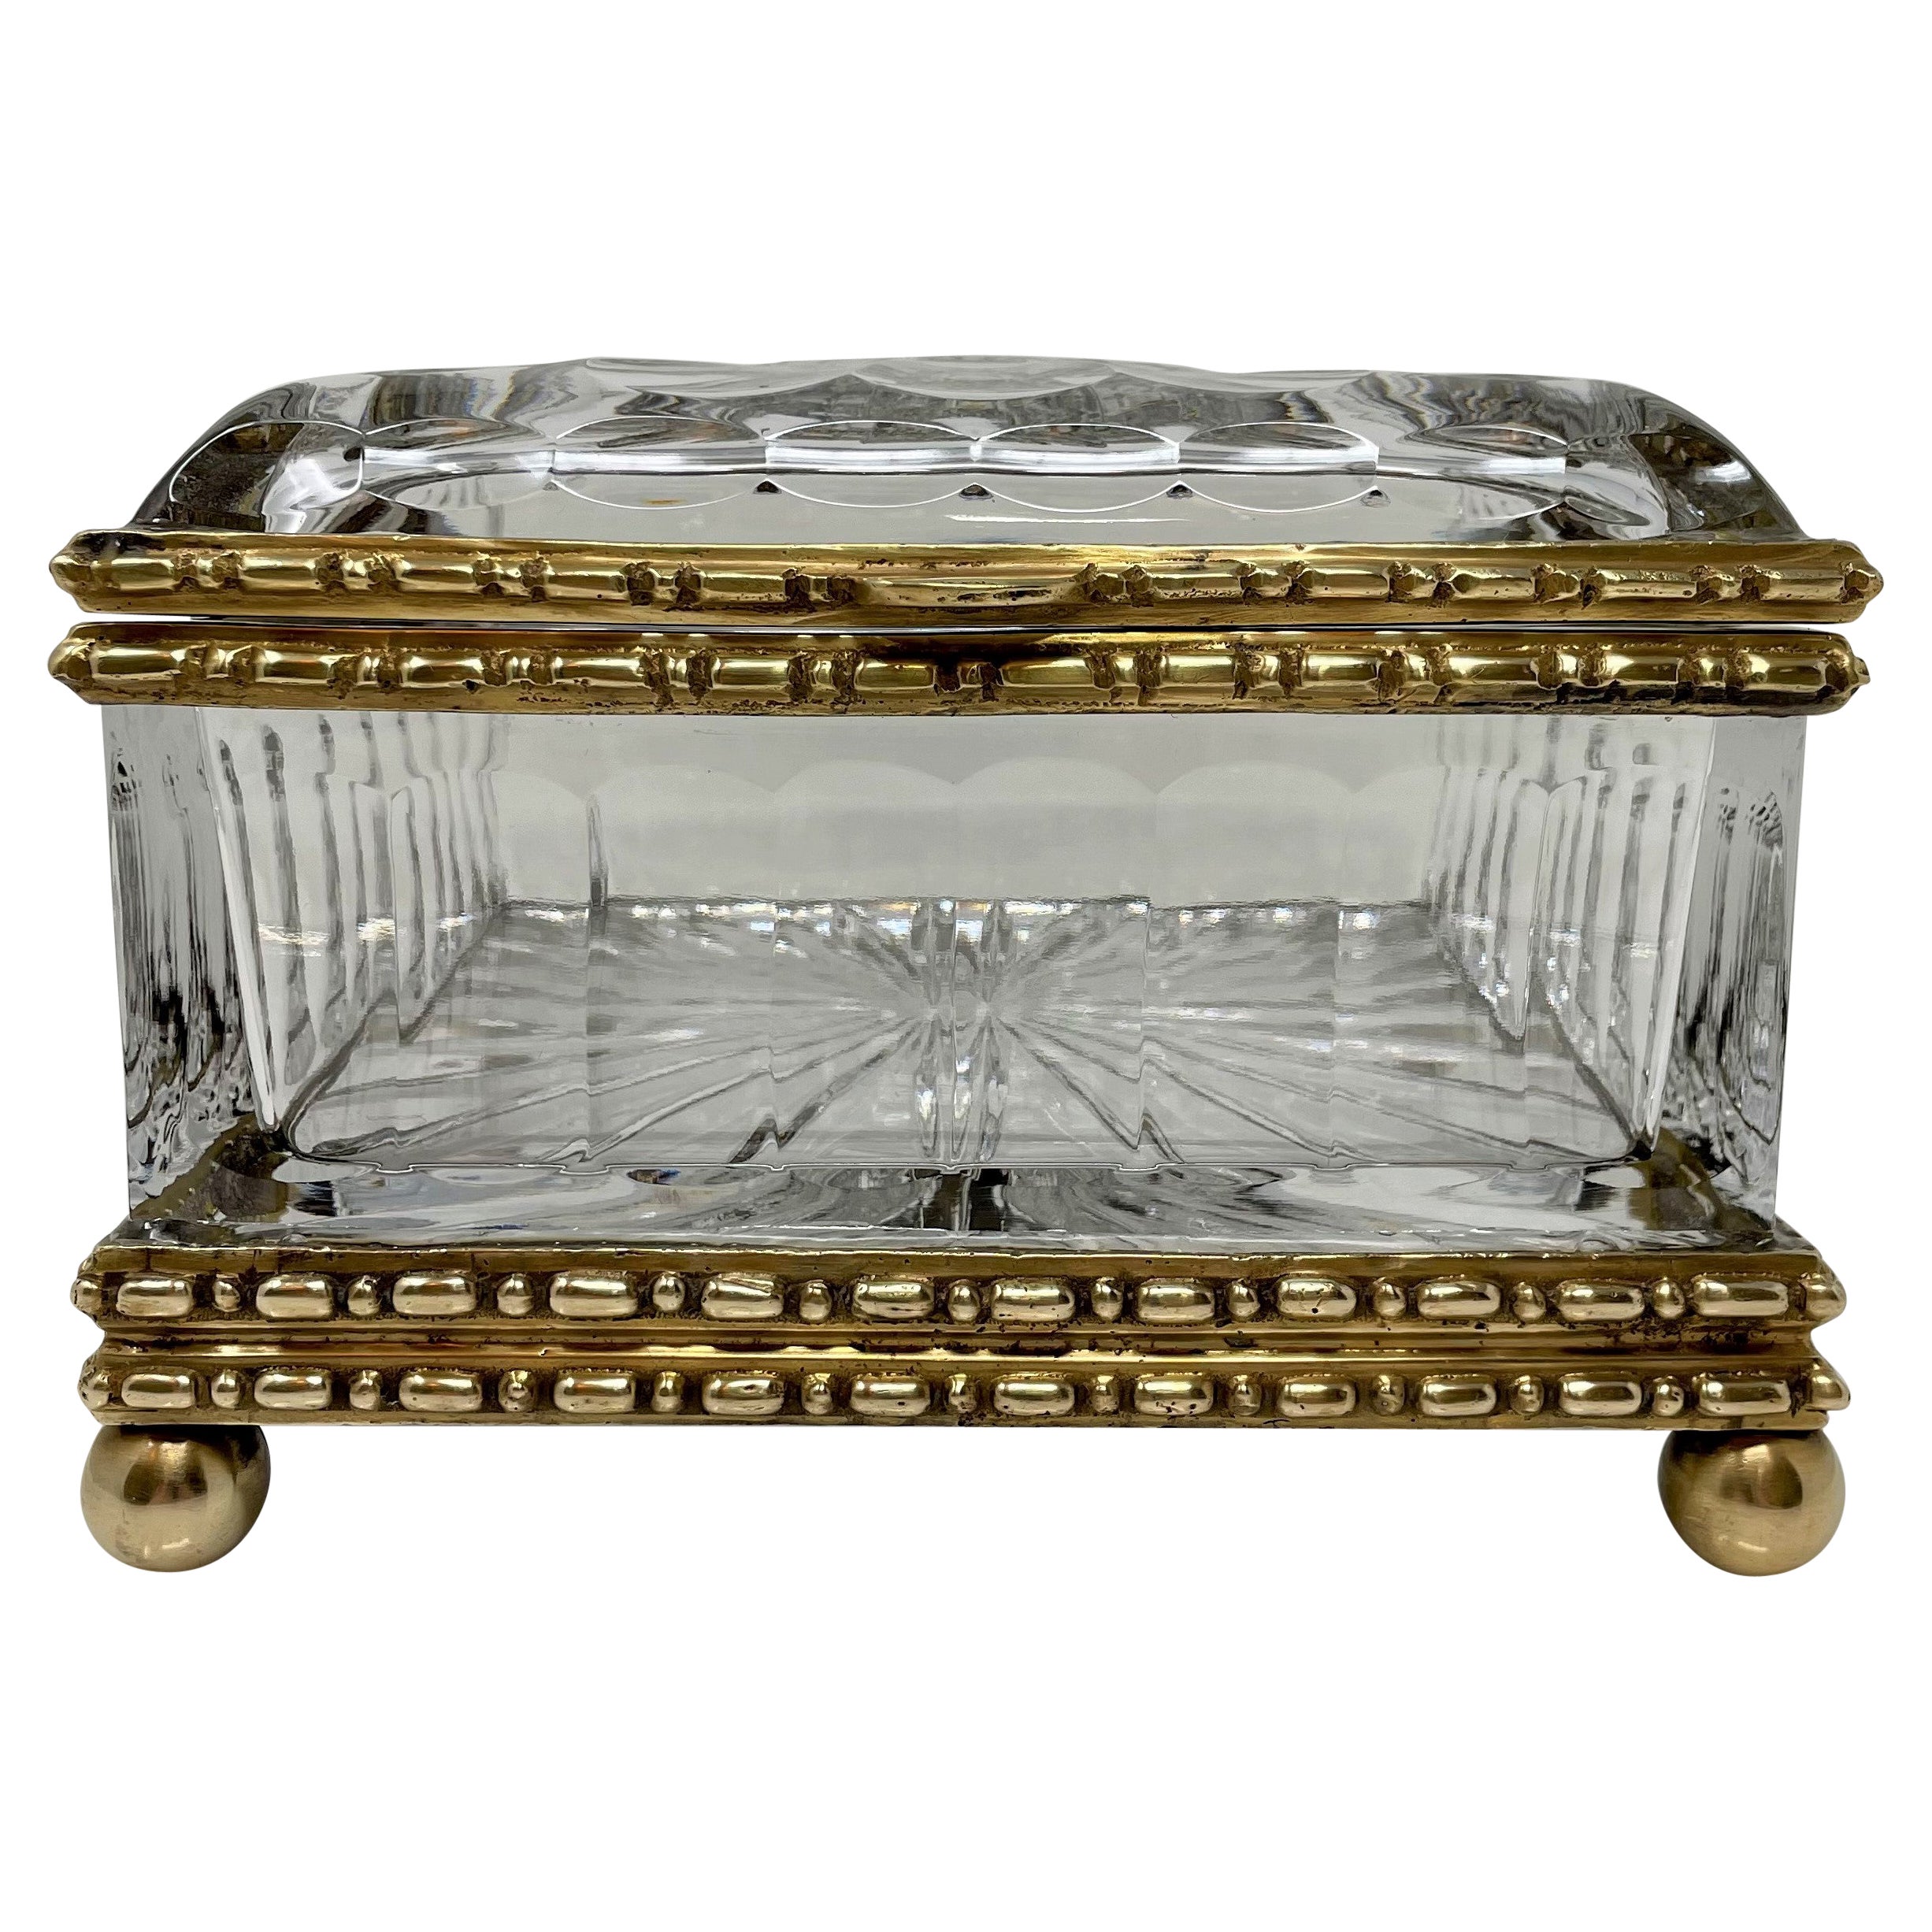 Antique French Cut Crystal and Bronze D' Ore Jewel Box, Circa 1900